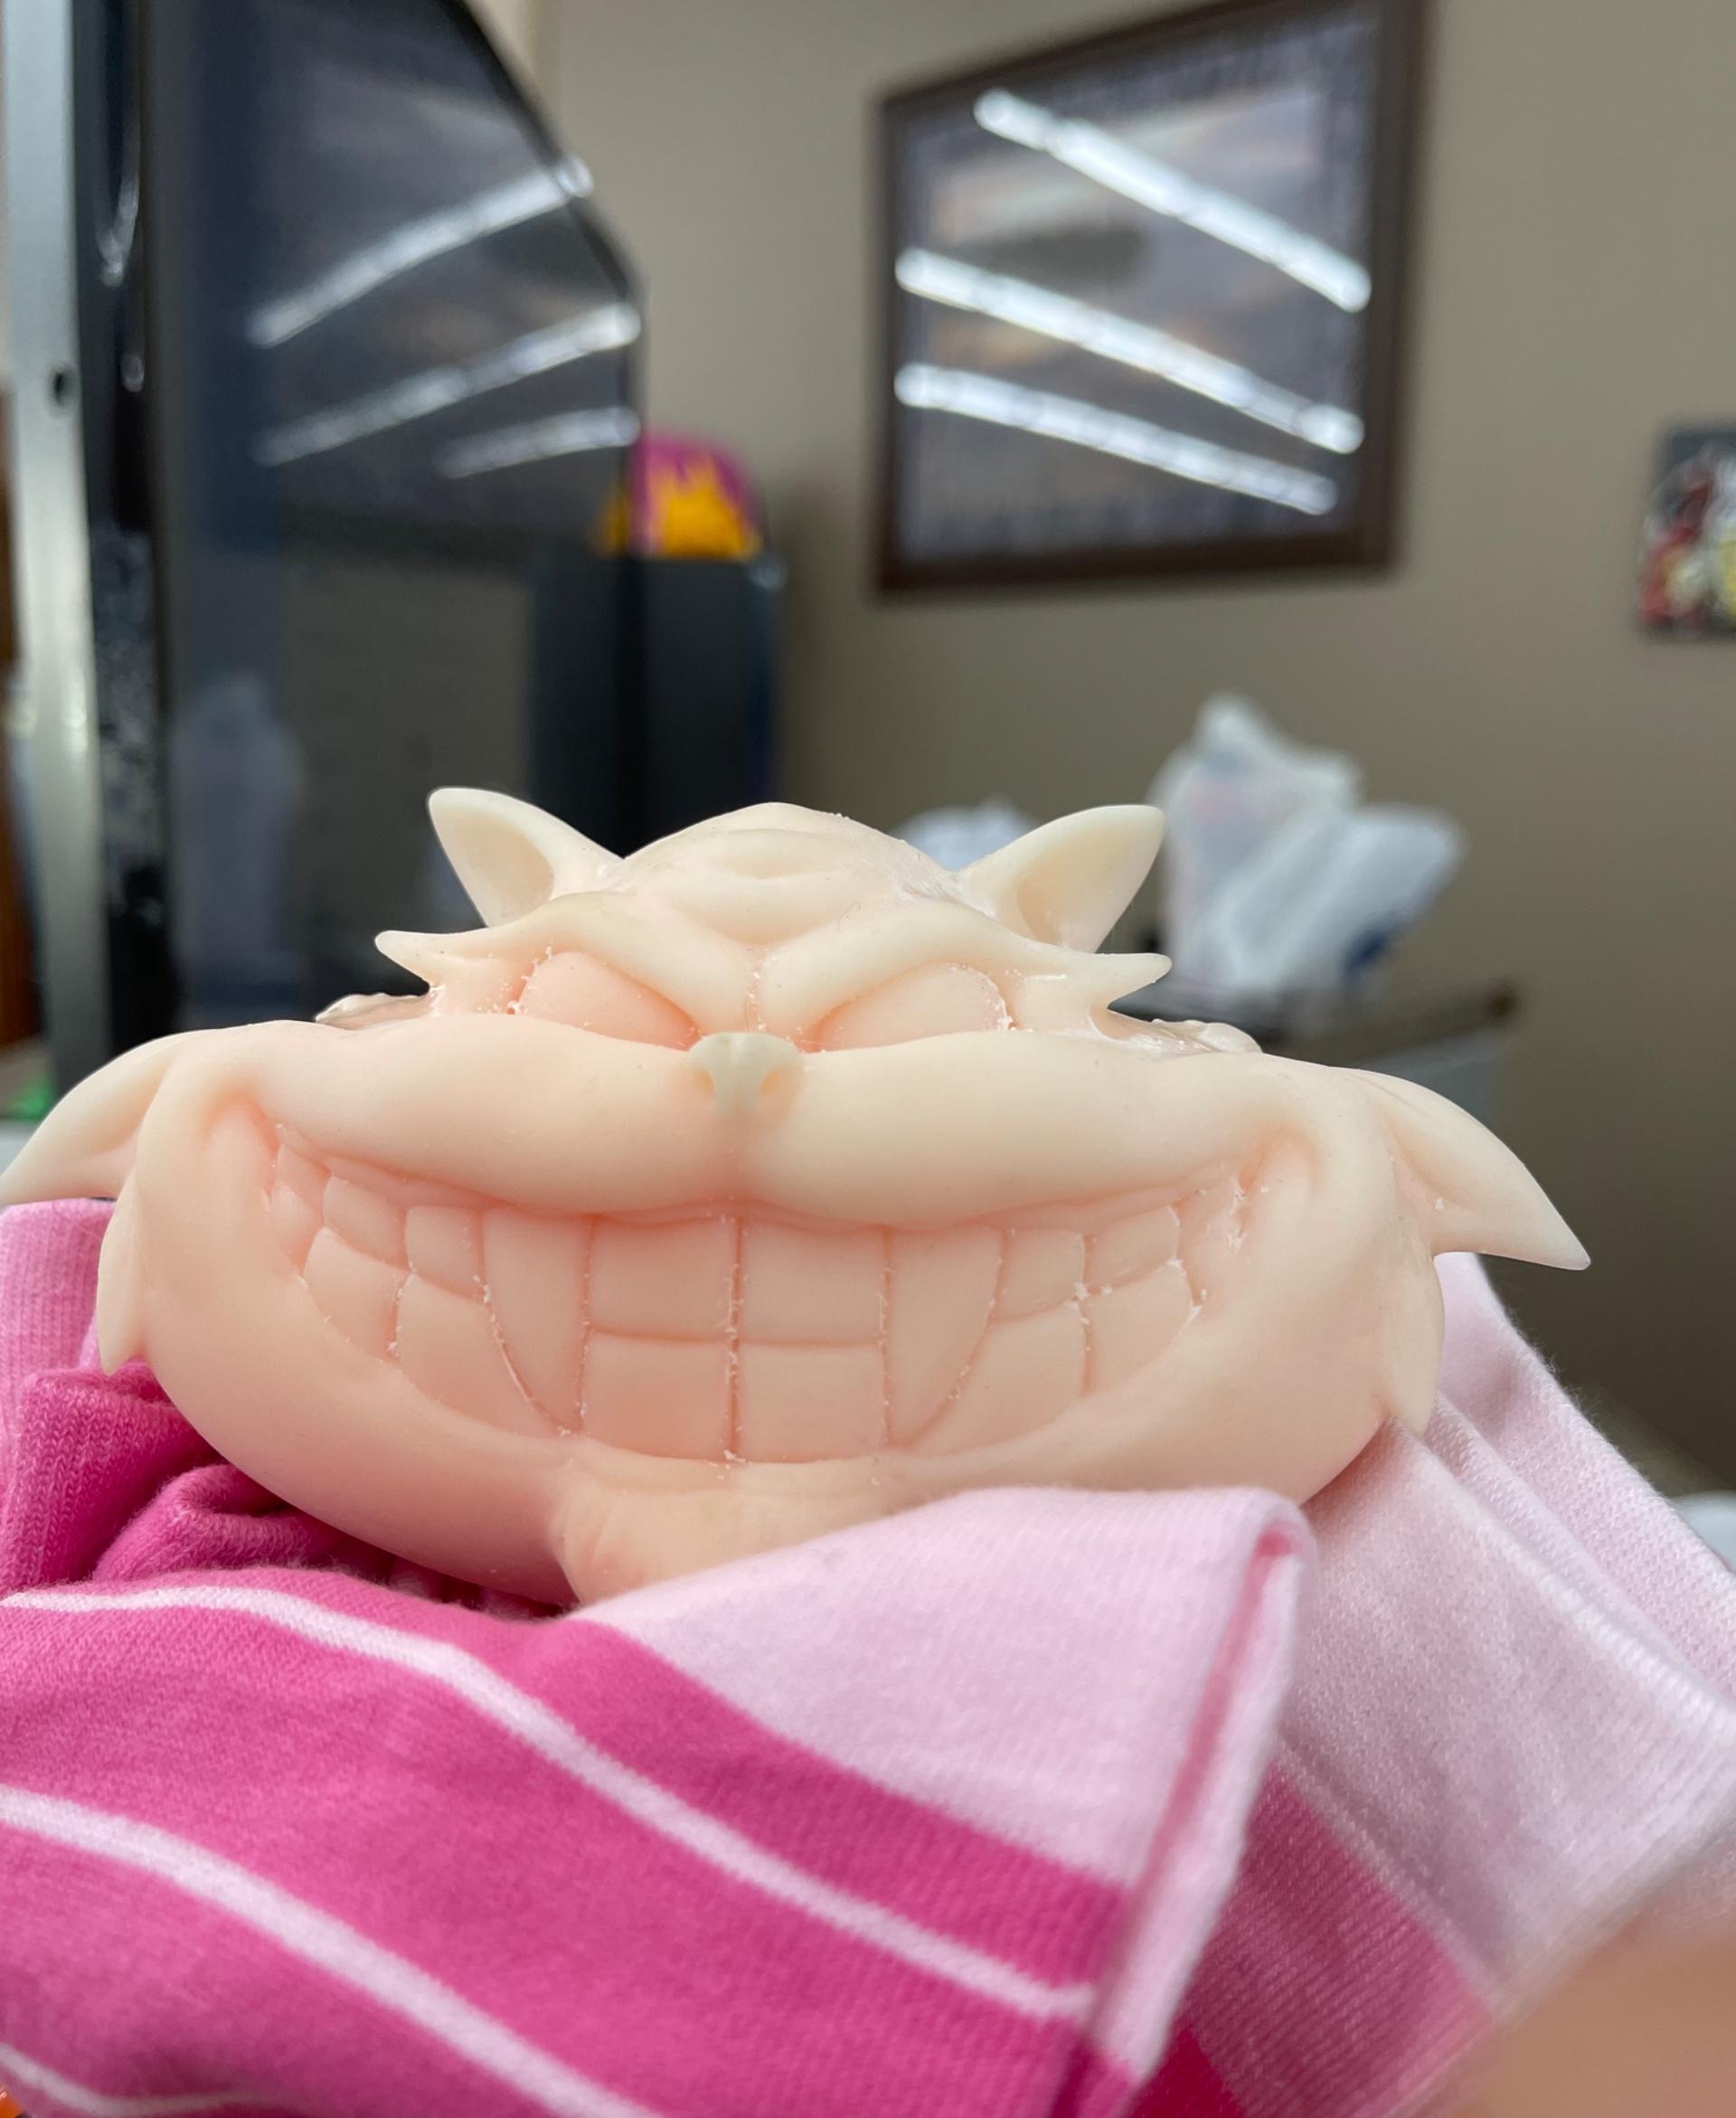 Pre Painted Cheshire Cat!  - Resin printed Cheshire Cat!!! Looks amazing on the breast cancer awareness socks. - 3d model